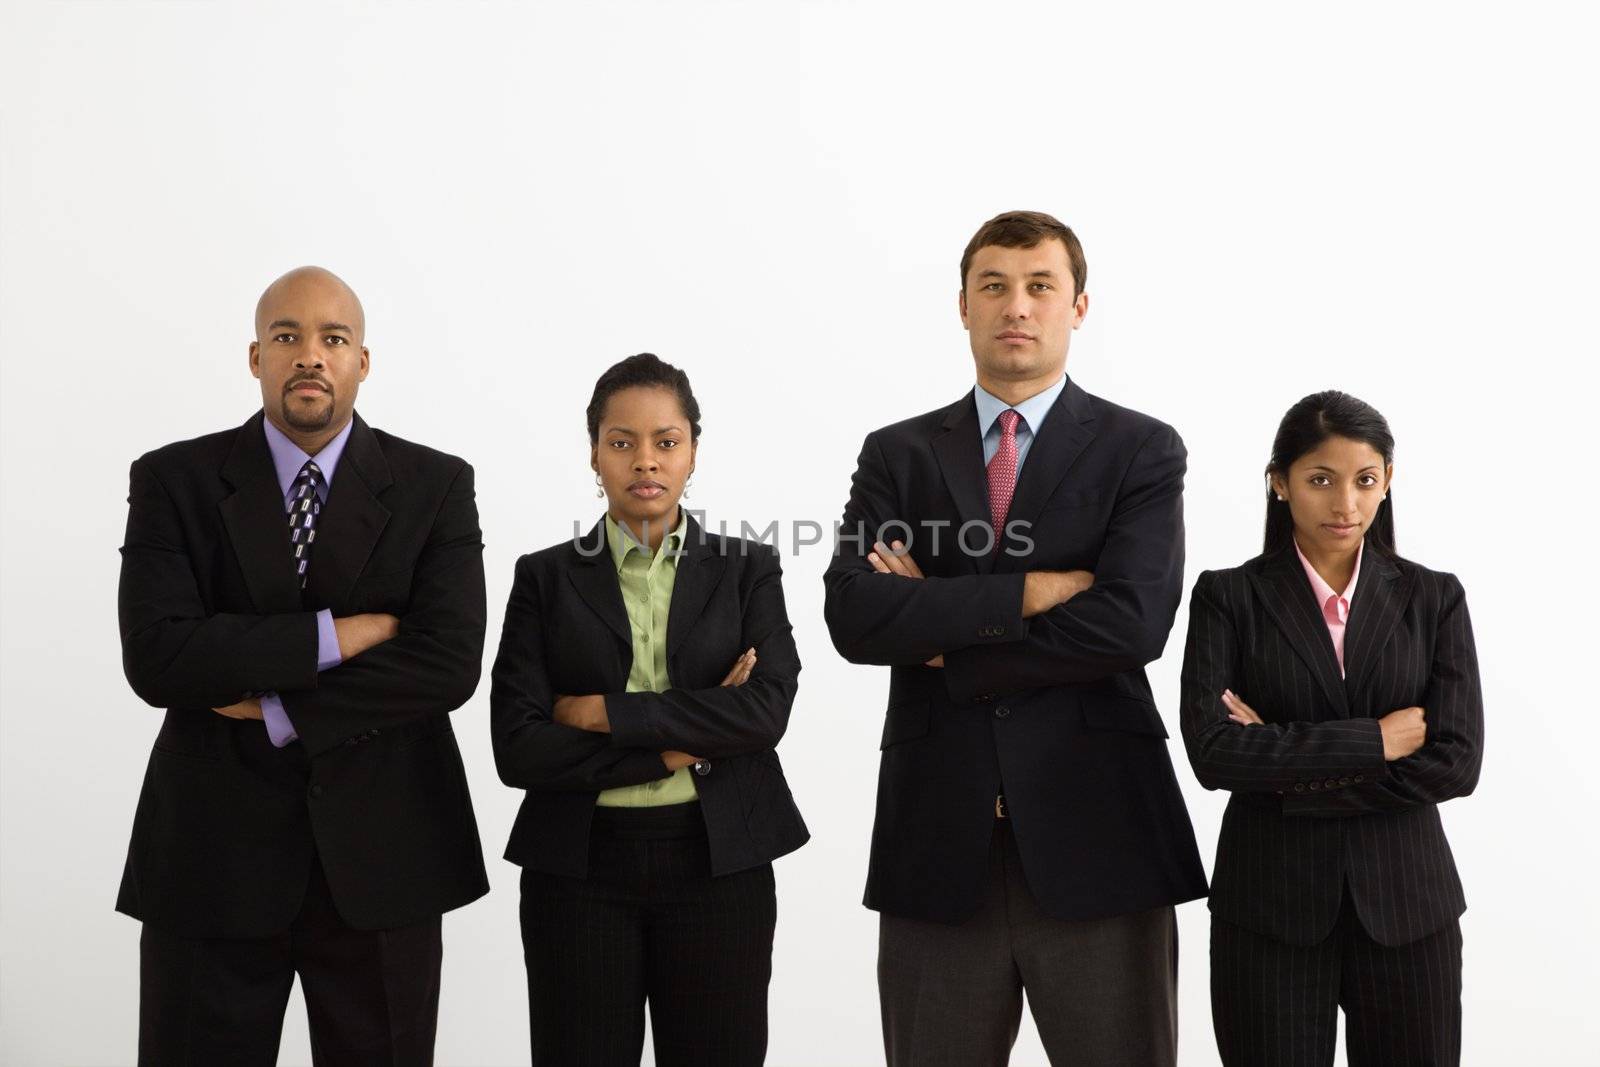 Portrait of businessmen and businesswomen standing with arms crossed looking serious.